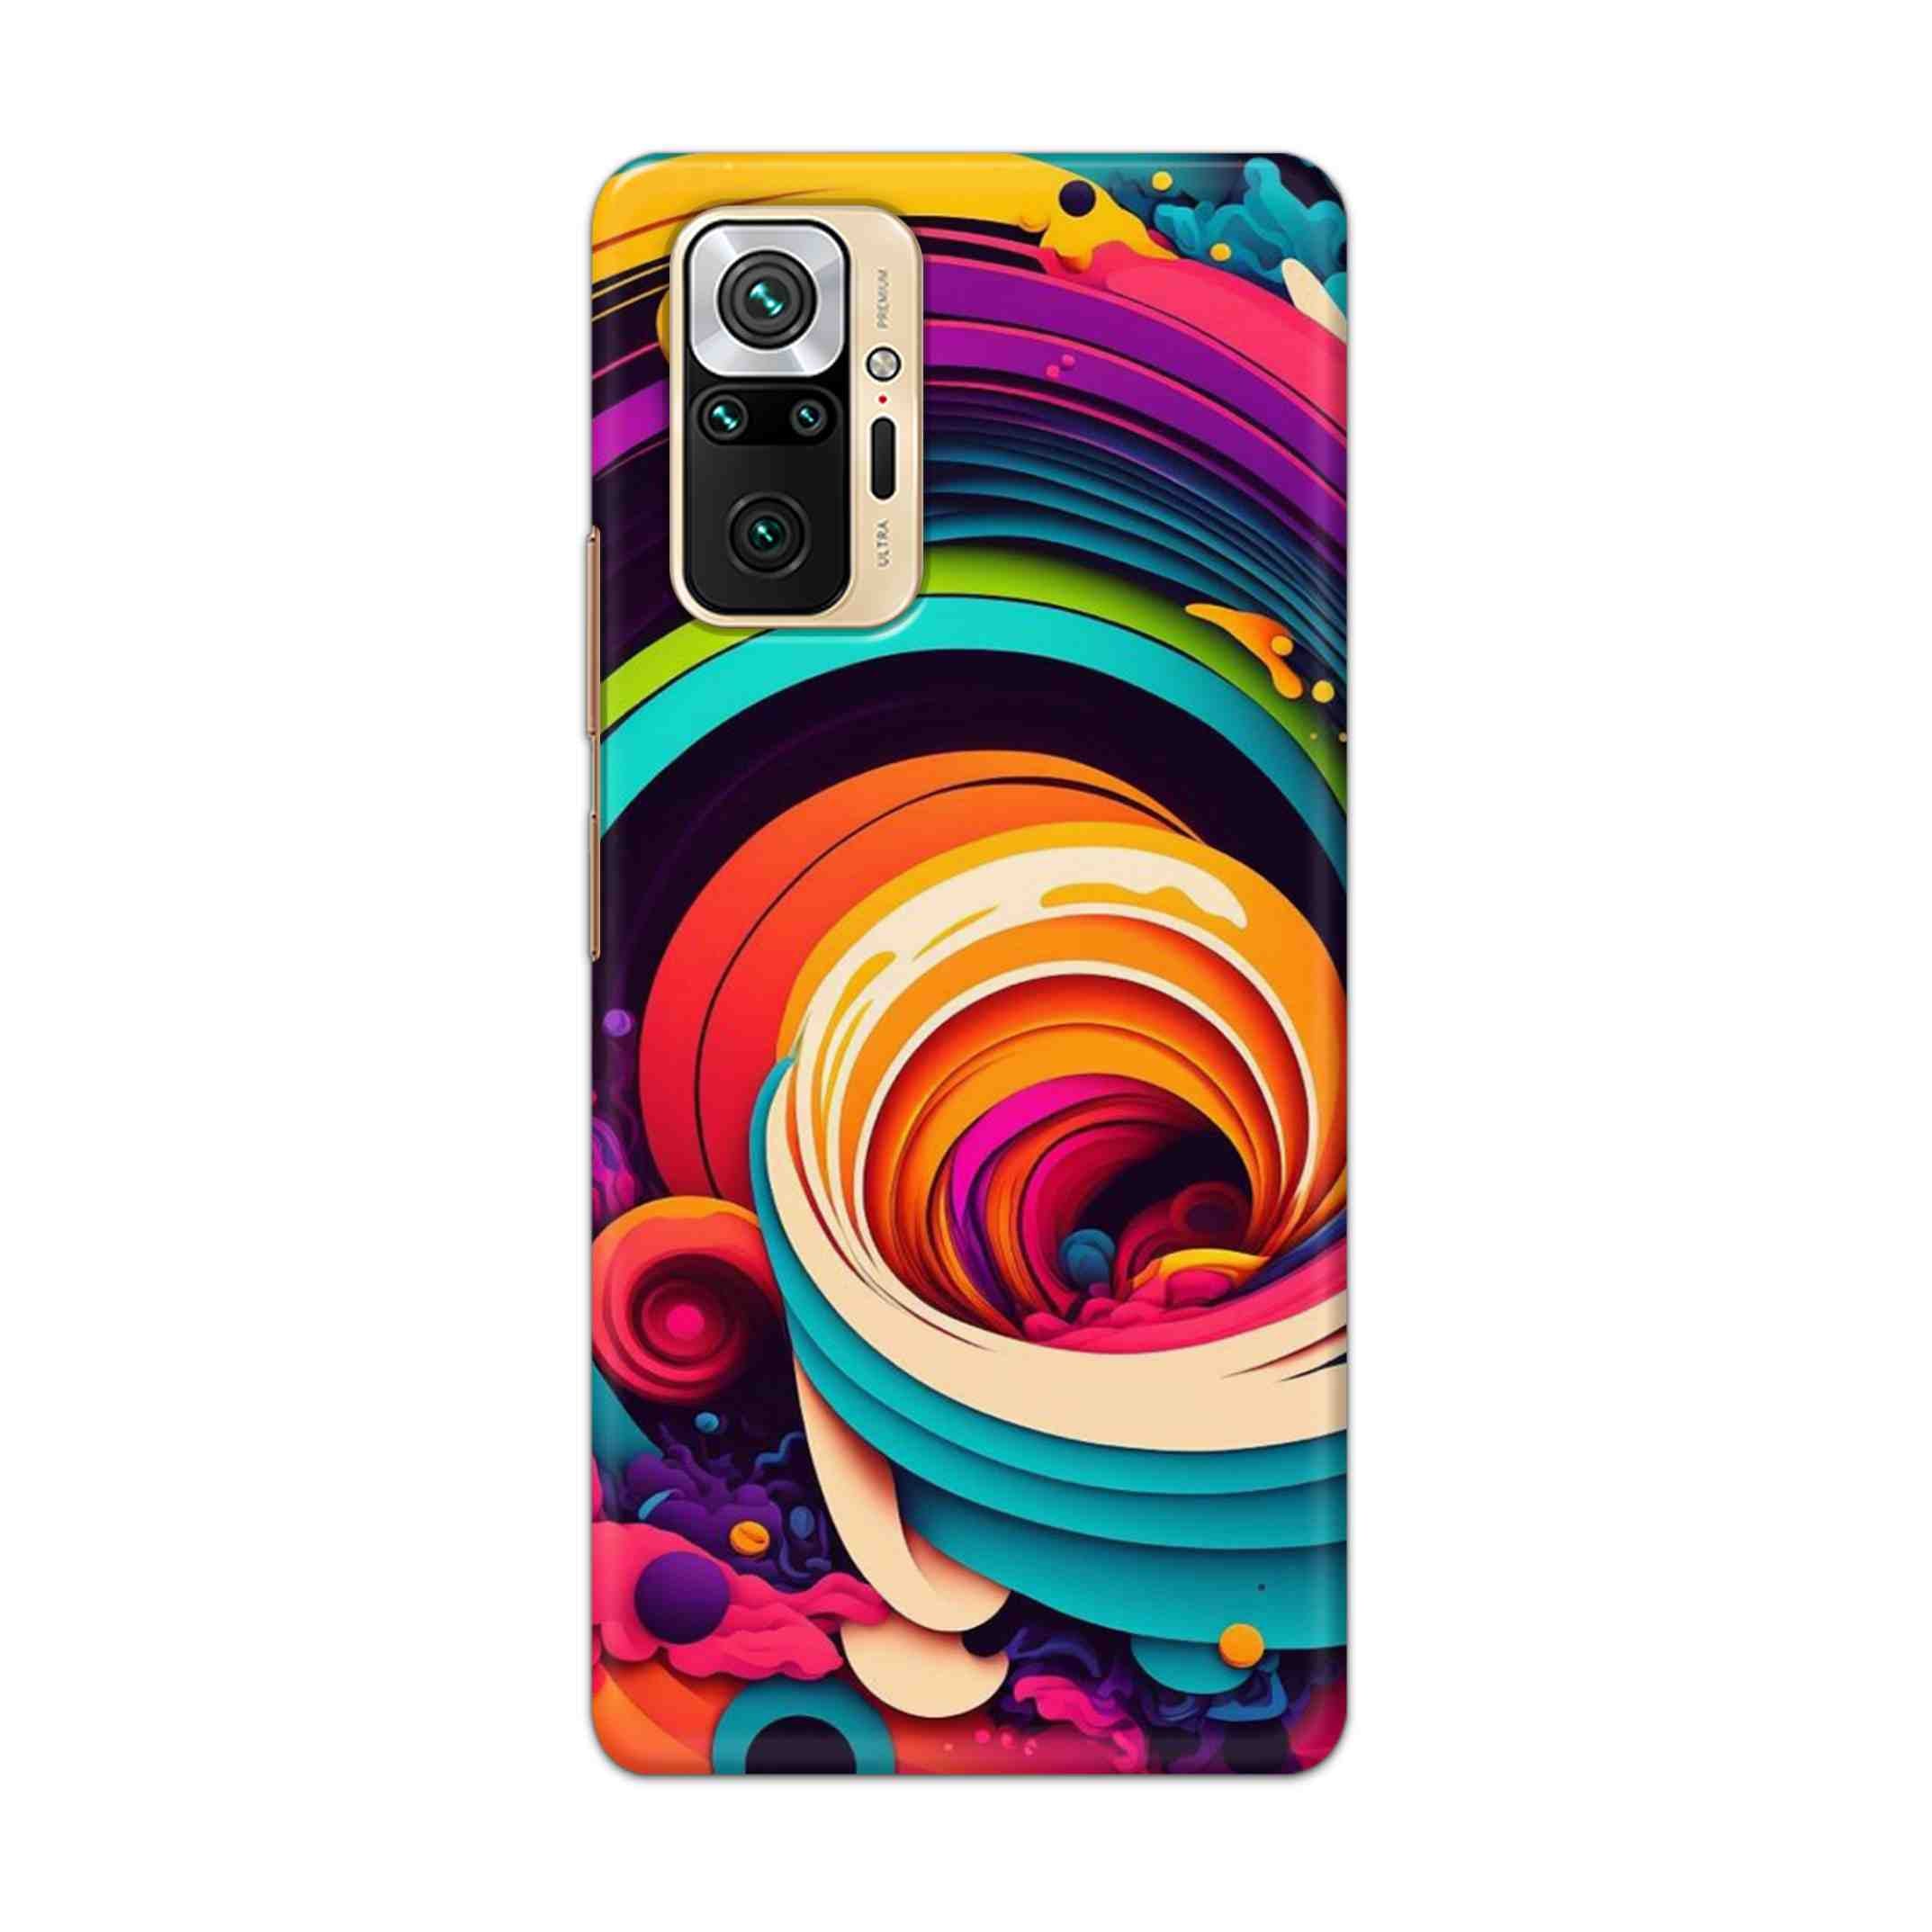 Buy Colour Circle Hard Back Mobile Phone Case Cover For Redmi Note 10 Pro Online